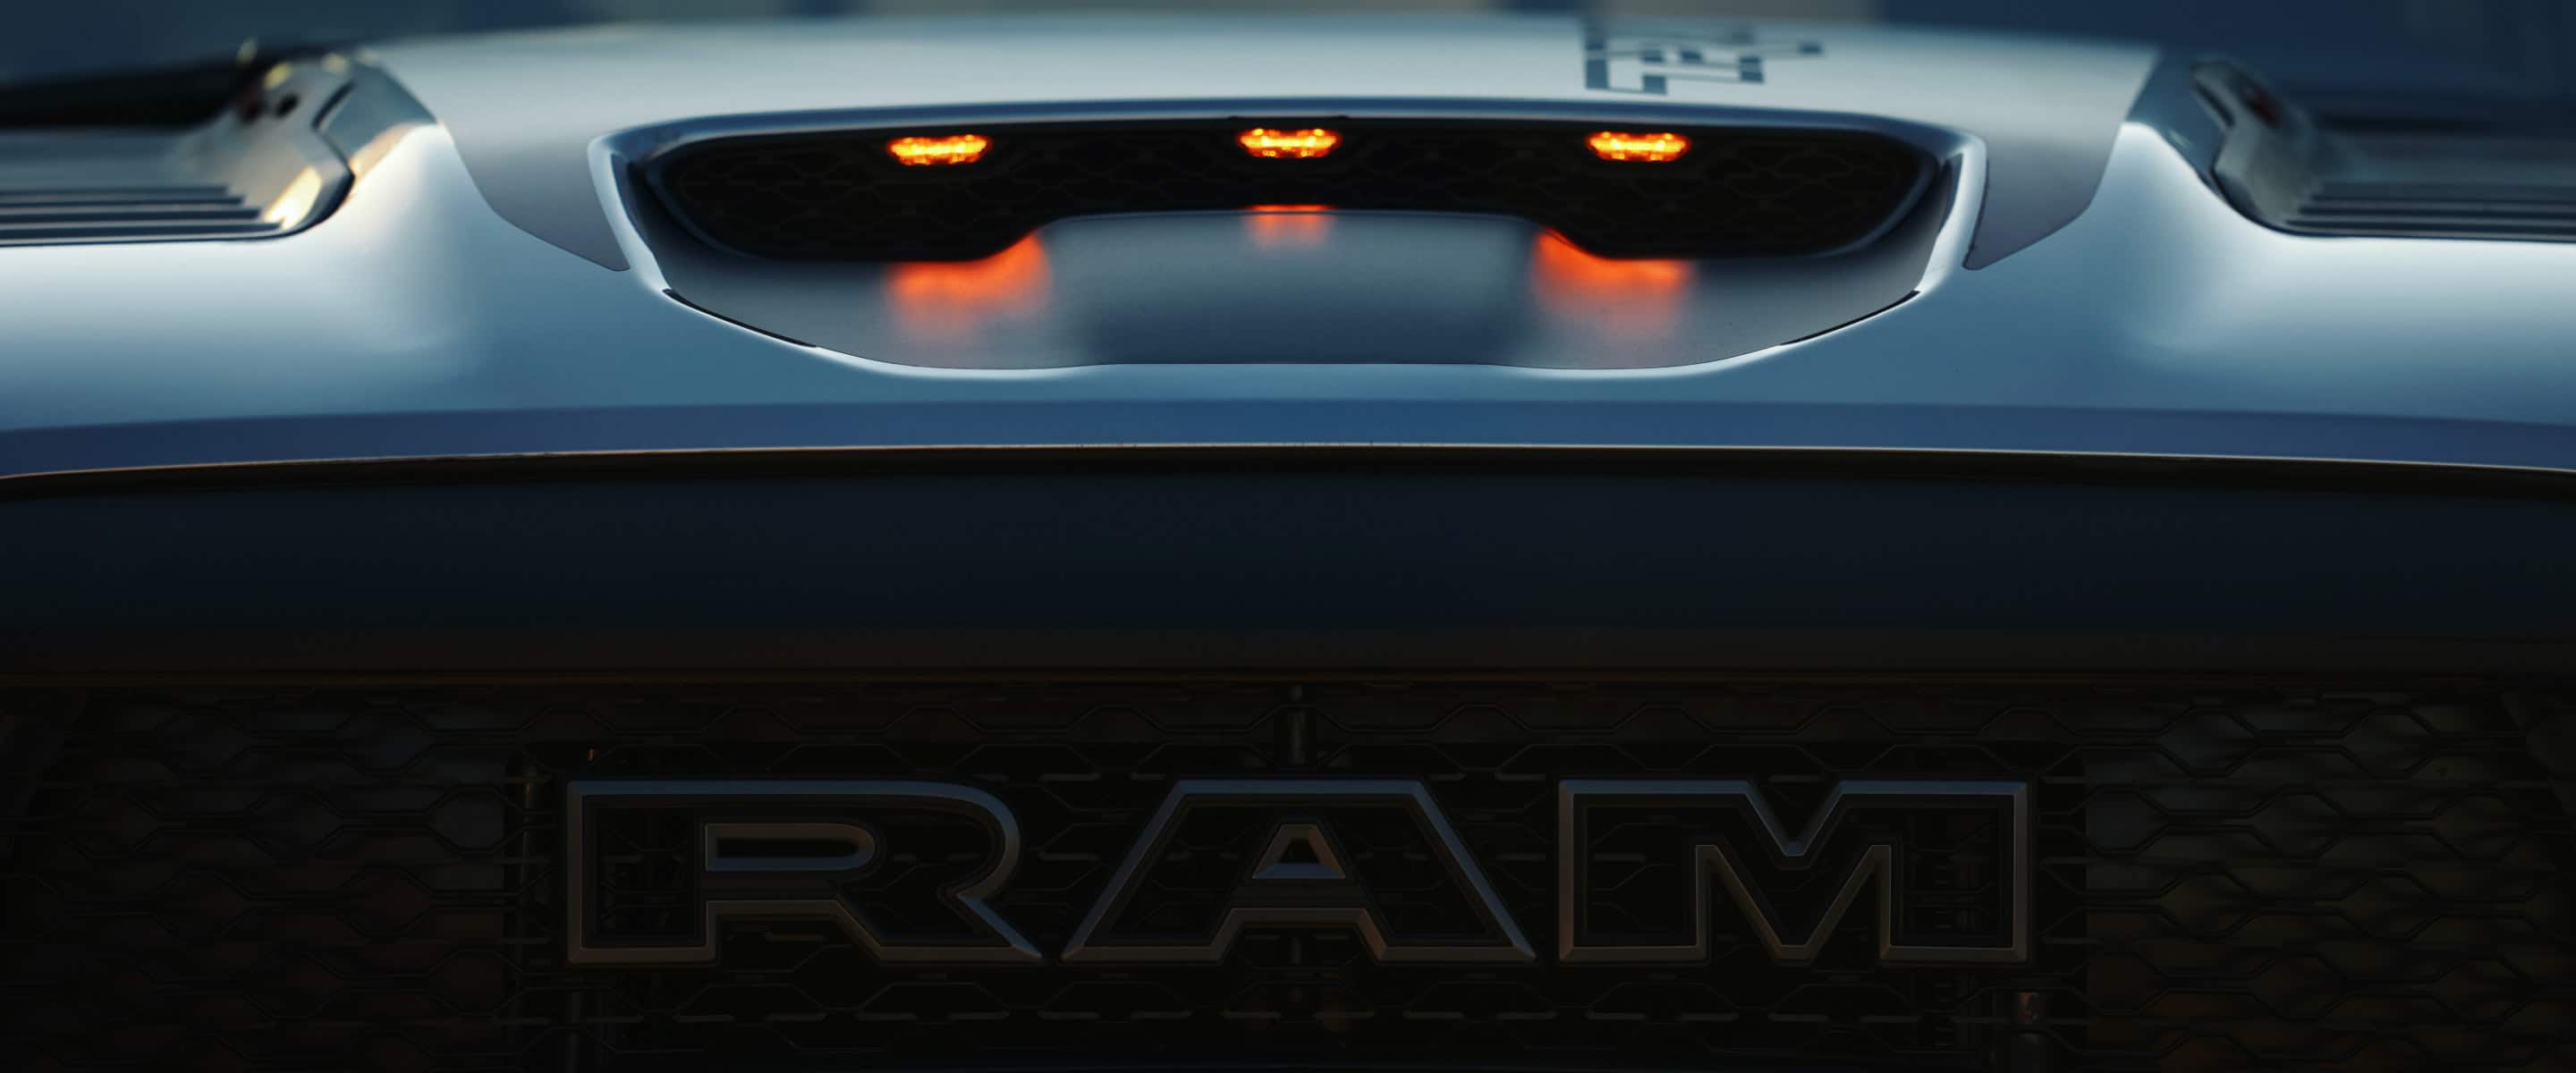 A close-up of the front grille and Ram badge on the 2021 Ram 1500 TRX.